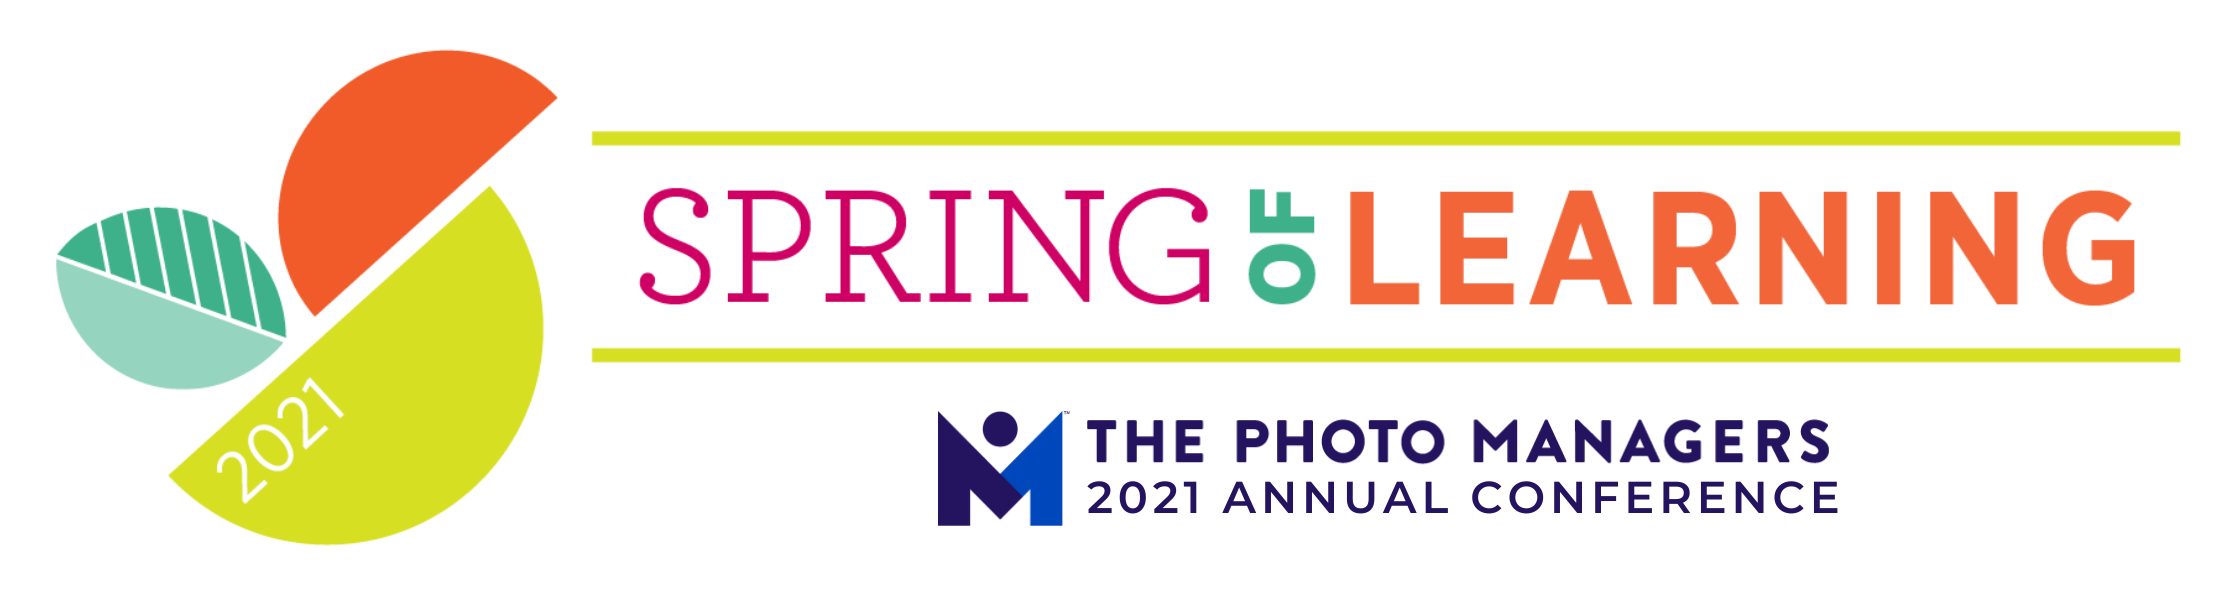 2021 Spring of Learning Annual TPM Conference